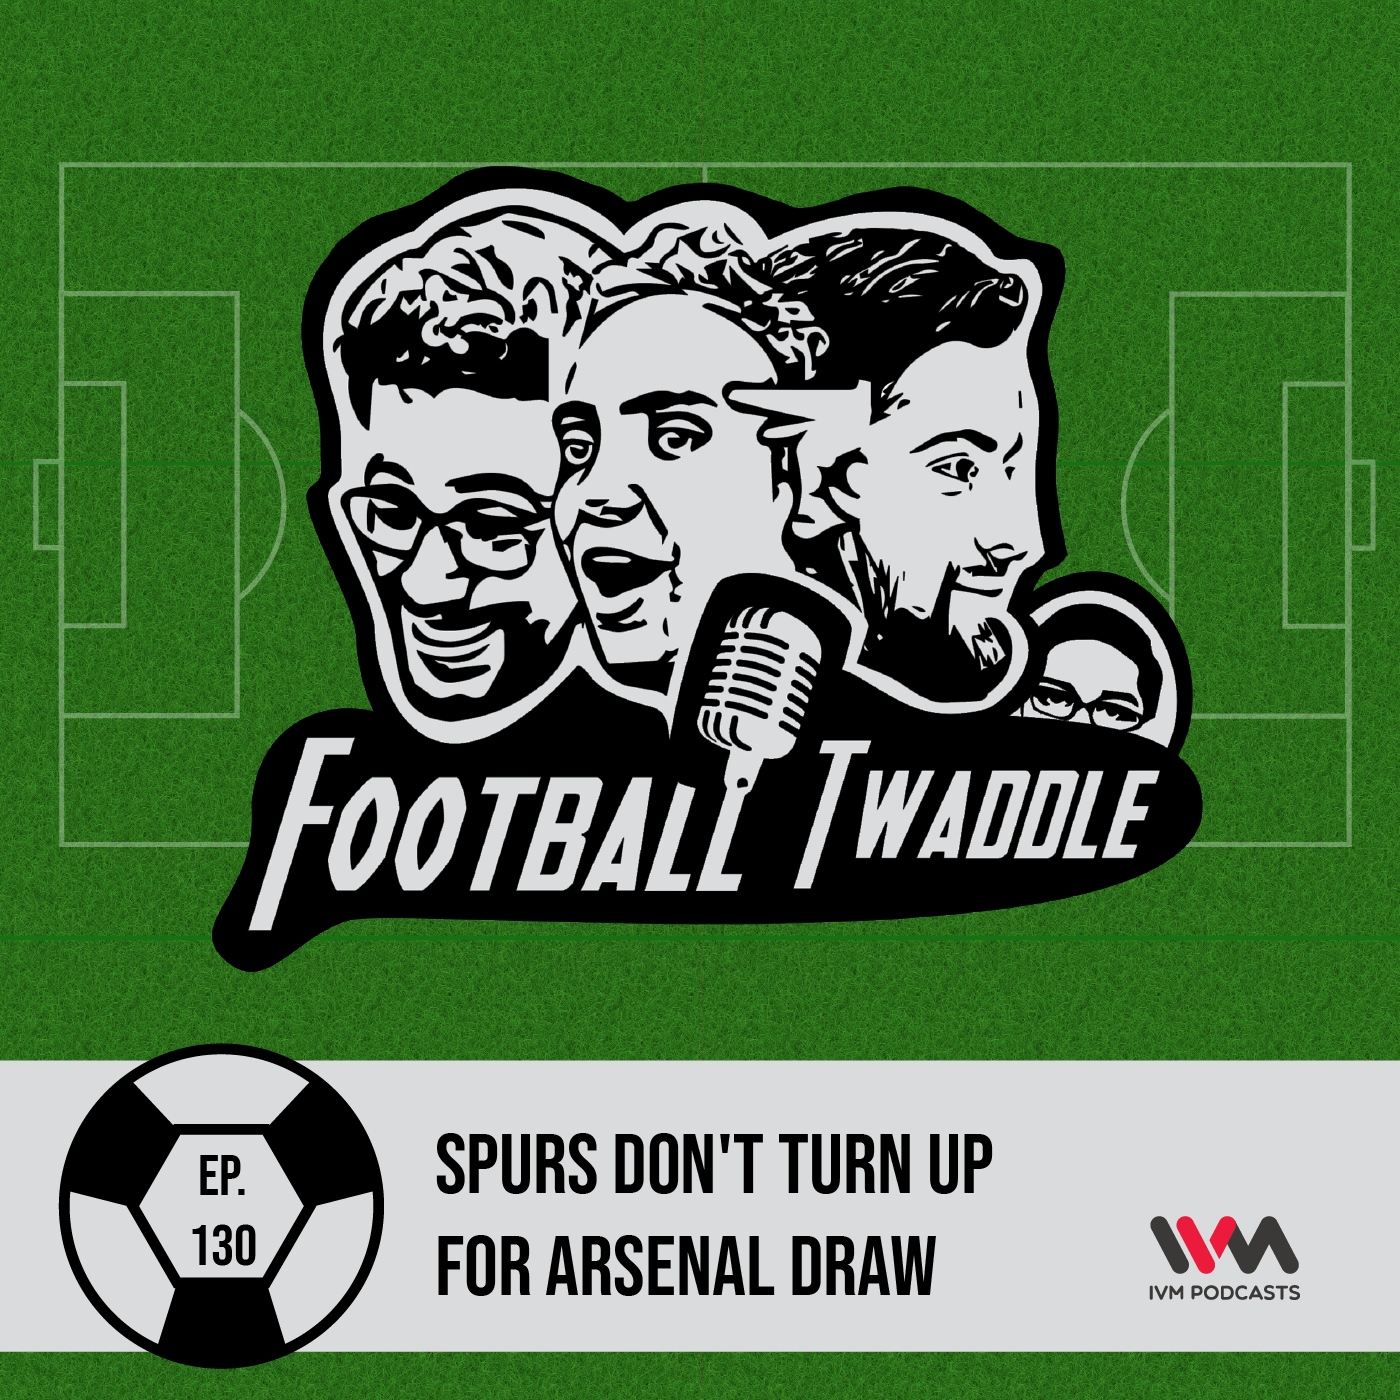 Spurs don't turn up for Arsenal draw